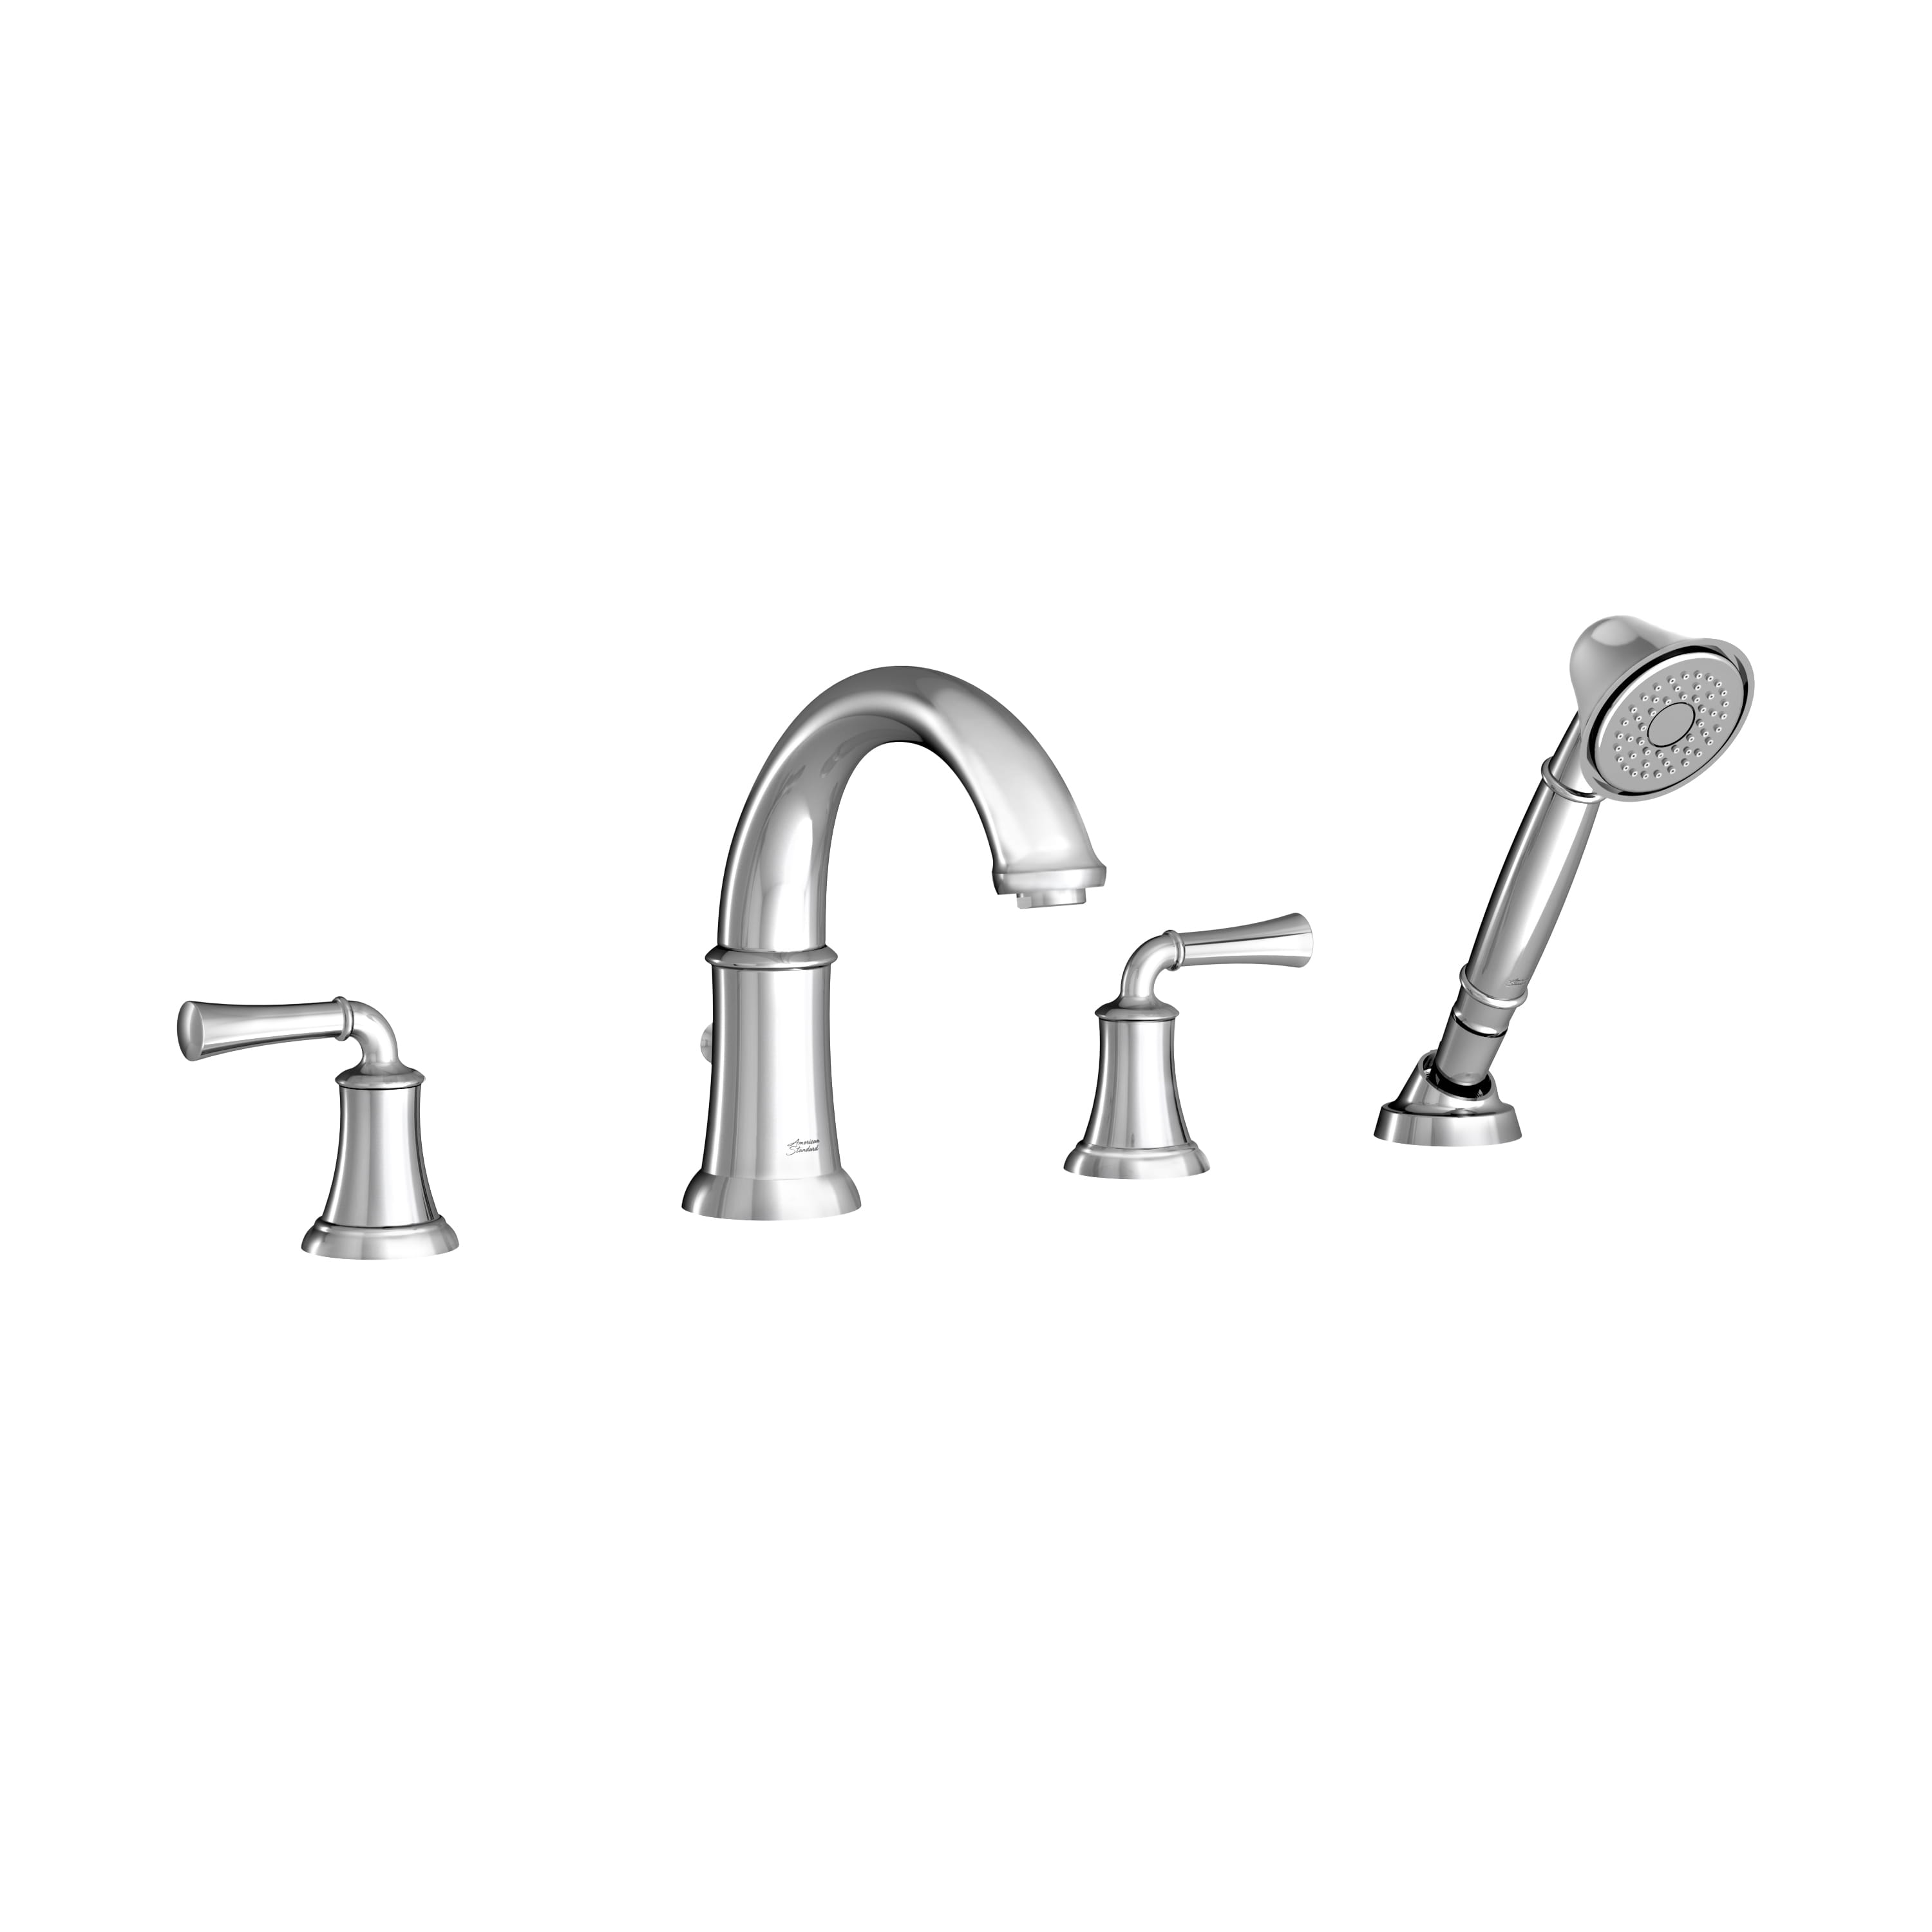 Portsmouth Bathtub Faucet with Personal Shower for Flash Rough-in Valve with Lever Handles